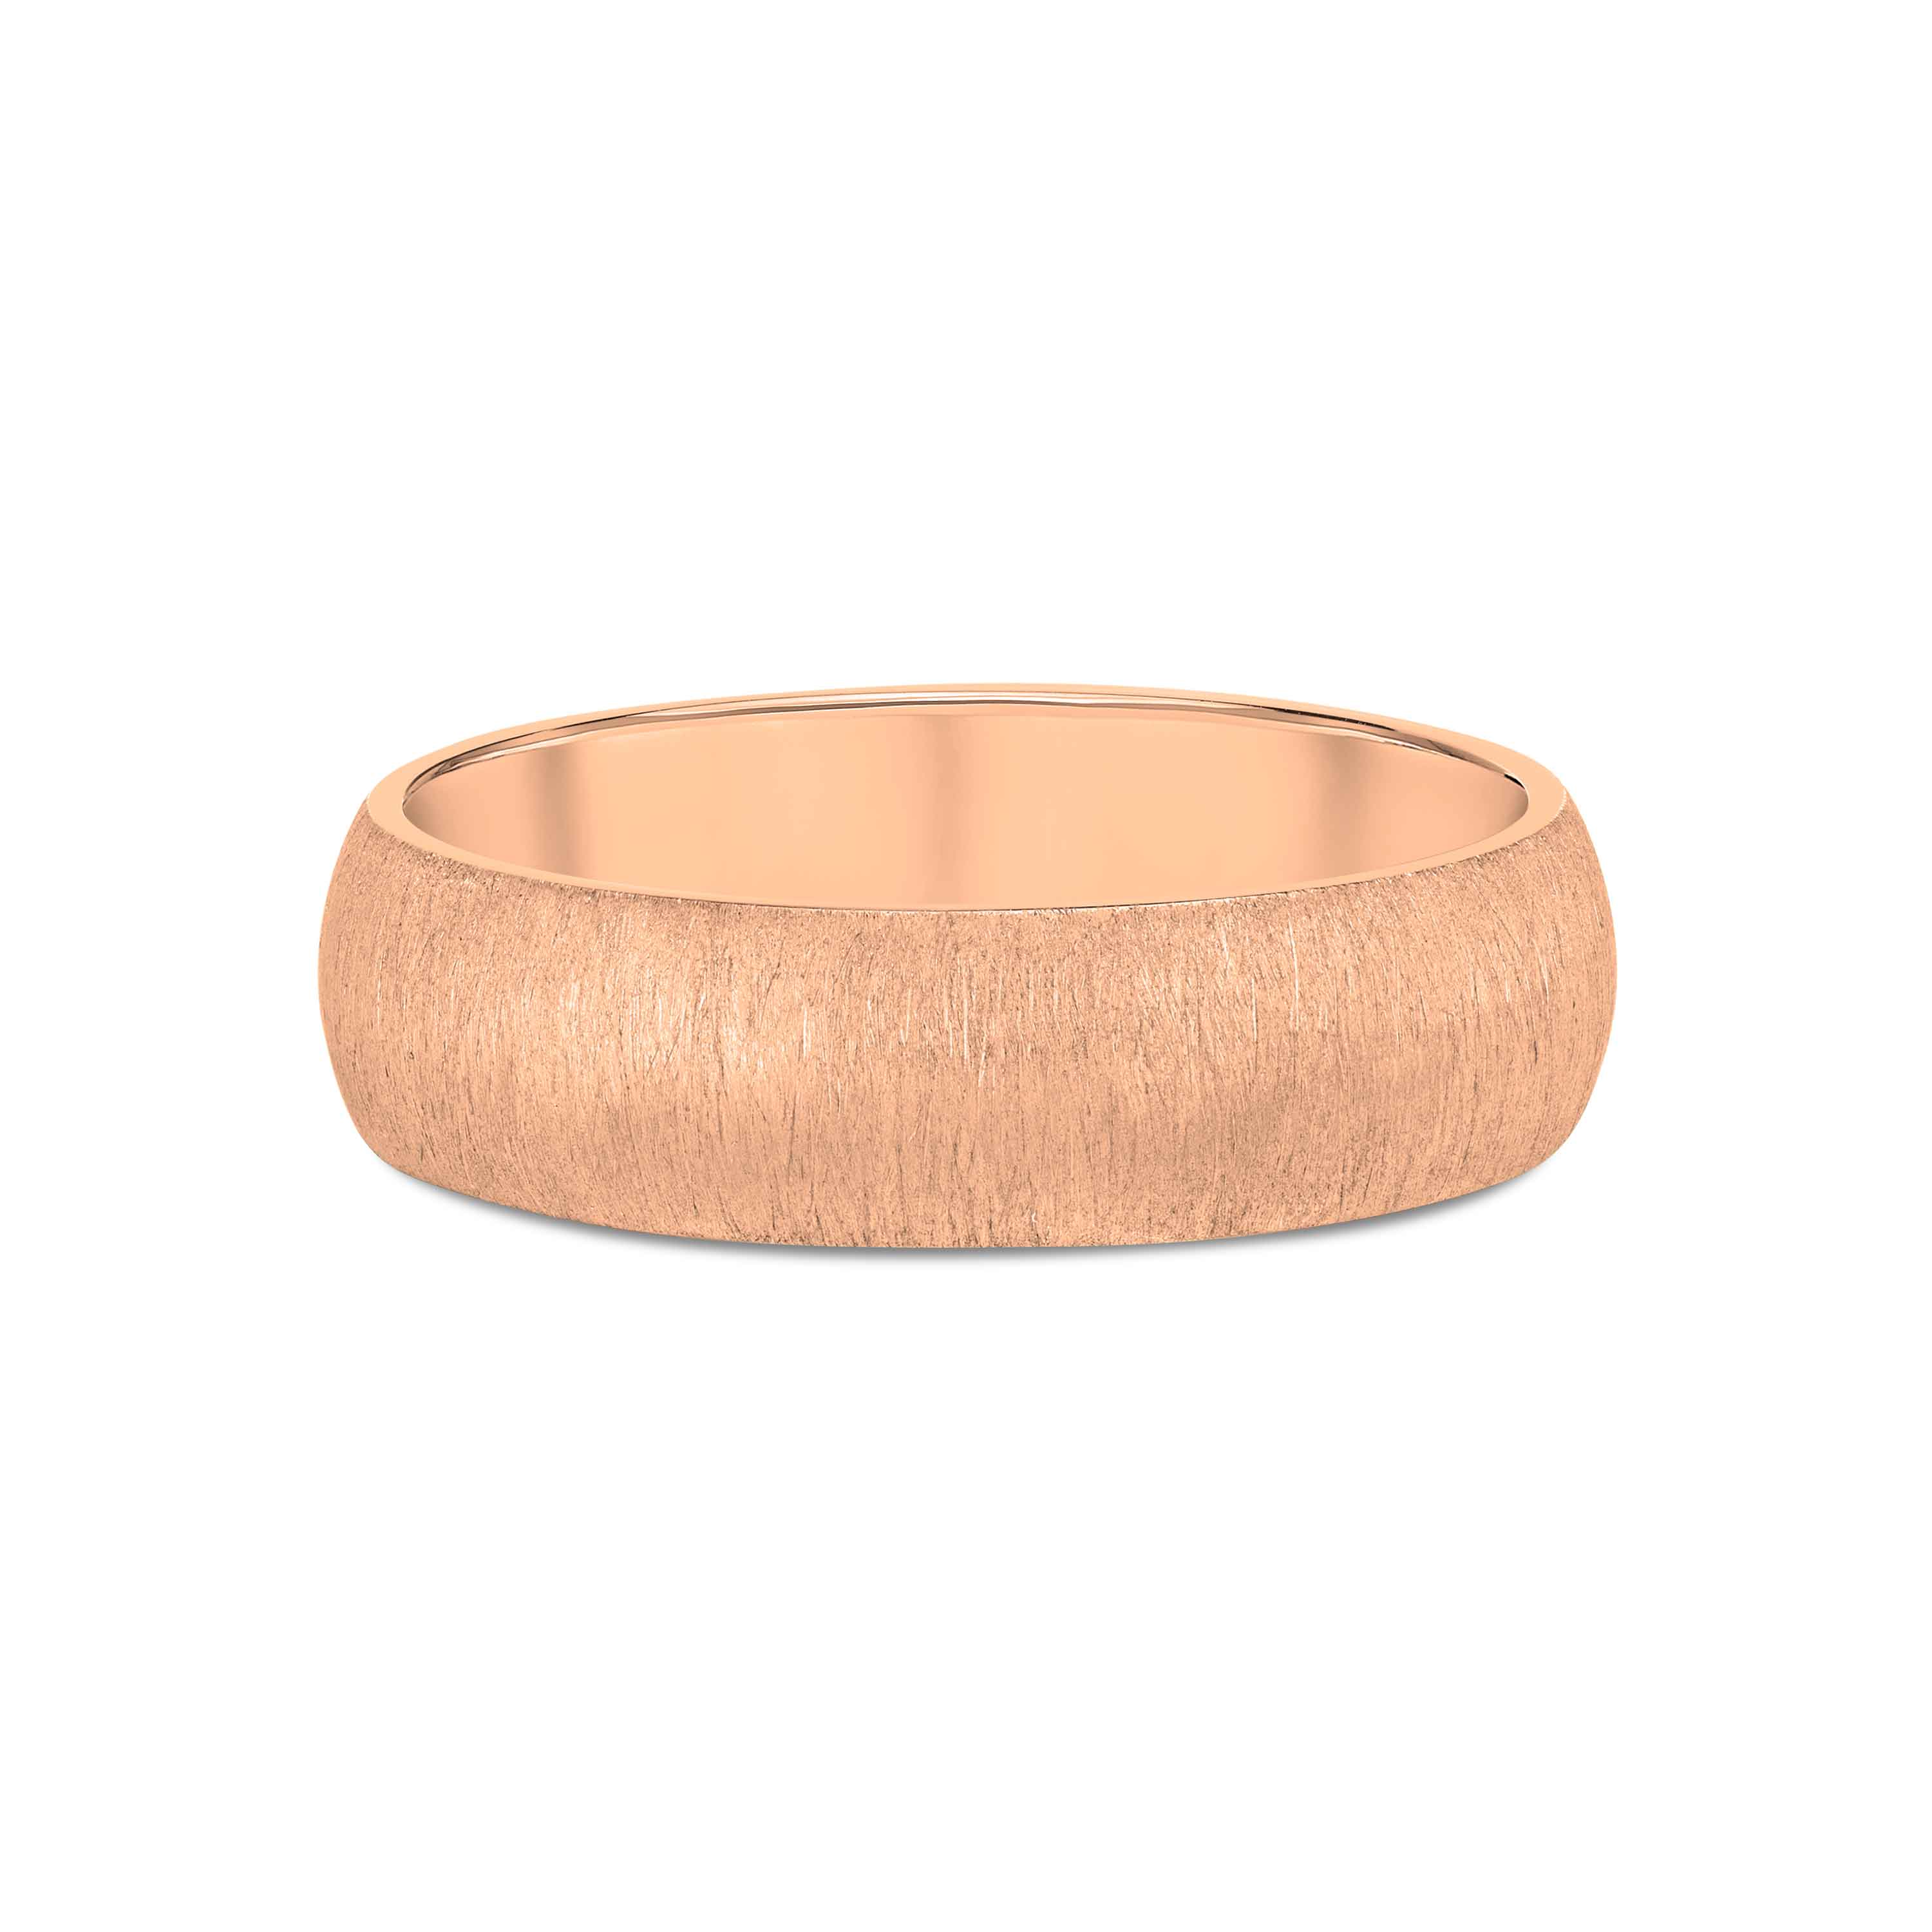 Moira Patience Fine Jewellery Brushed textured wedding band